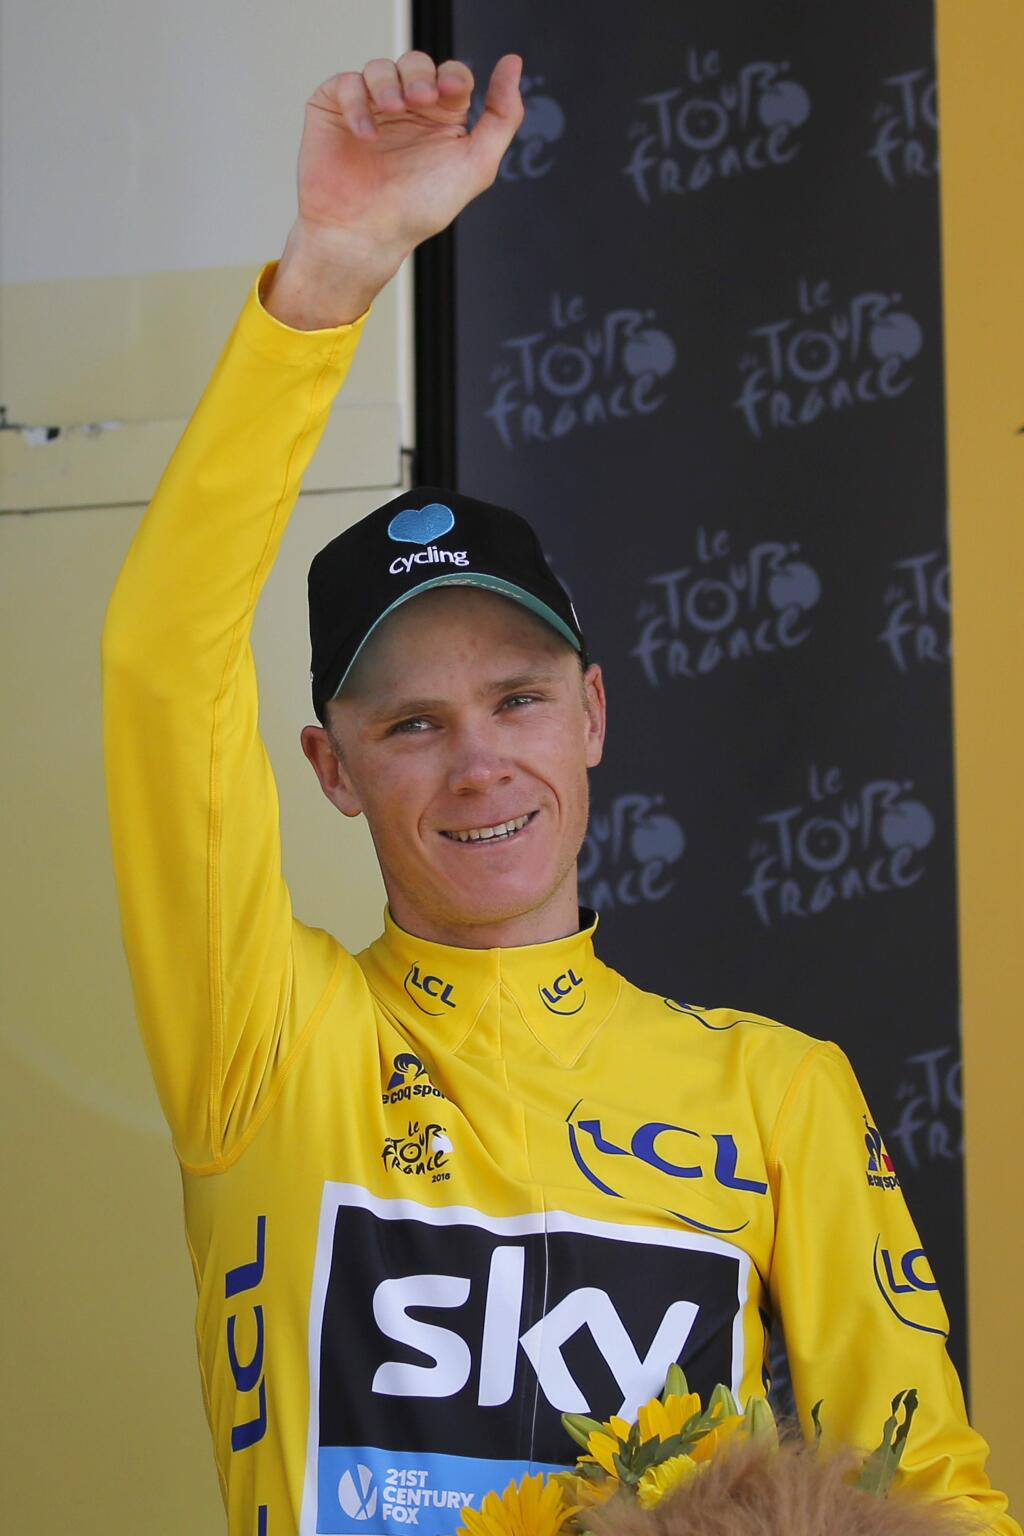 Britain's Chris Froome, wearing the overall leader's yellow jersey, celebrates on the podium after the seventeenth stage of the Tour de France cycling race over 184.5 kilometers (114.3 miles) with start in Bern and finish in Finhaut-Emosson, Switzerland, Wednesday, July 20, 2016. (AP Photo/Christophe Ena)